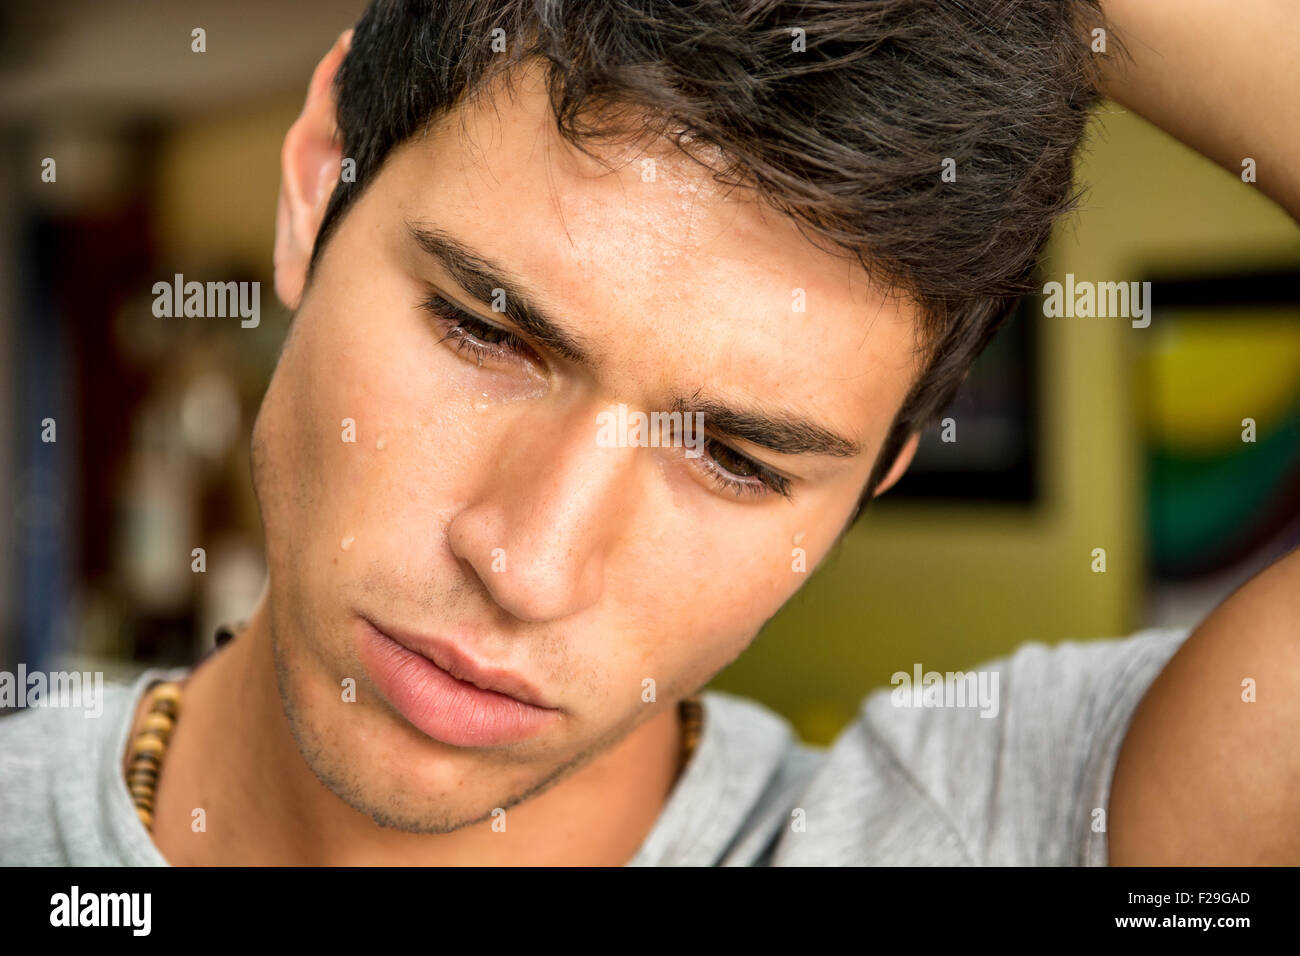 Close up Face of a Pensive Handsome Young Man with Tears on his Face, Looking Down, Worried or Sad. Stock Photo